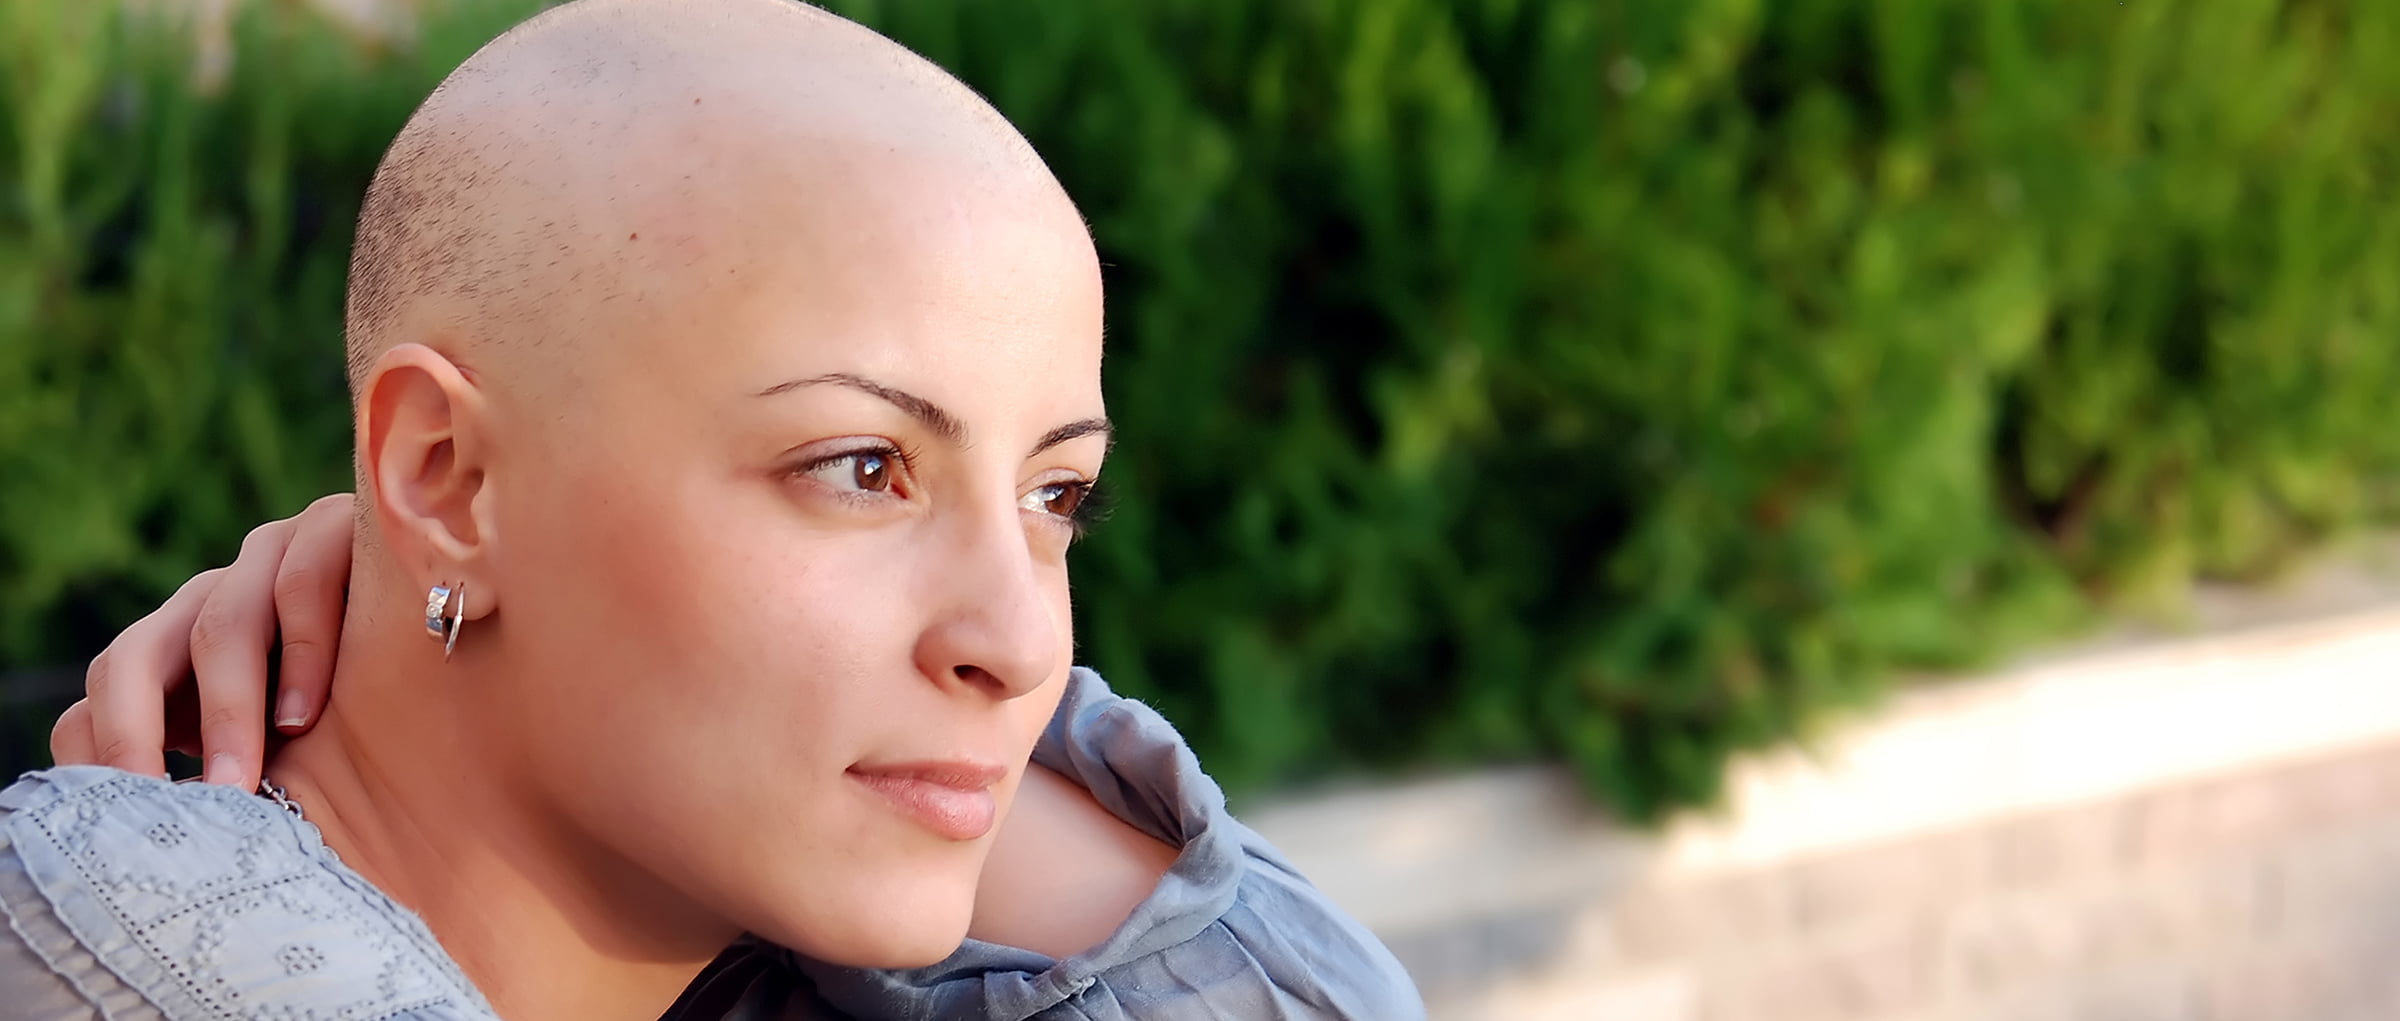 Mujer con cáncer